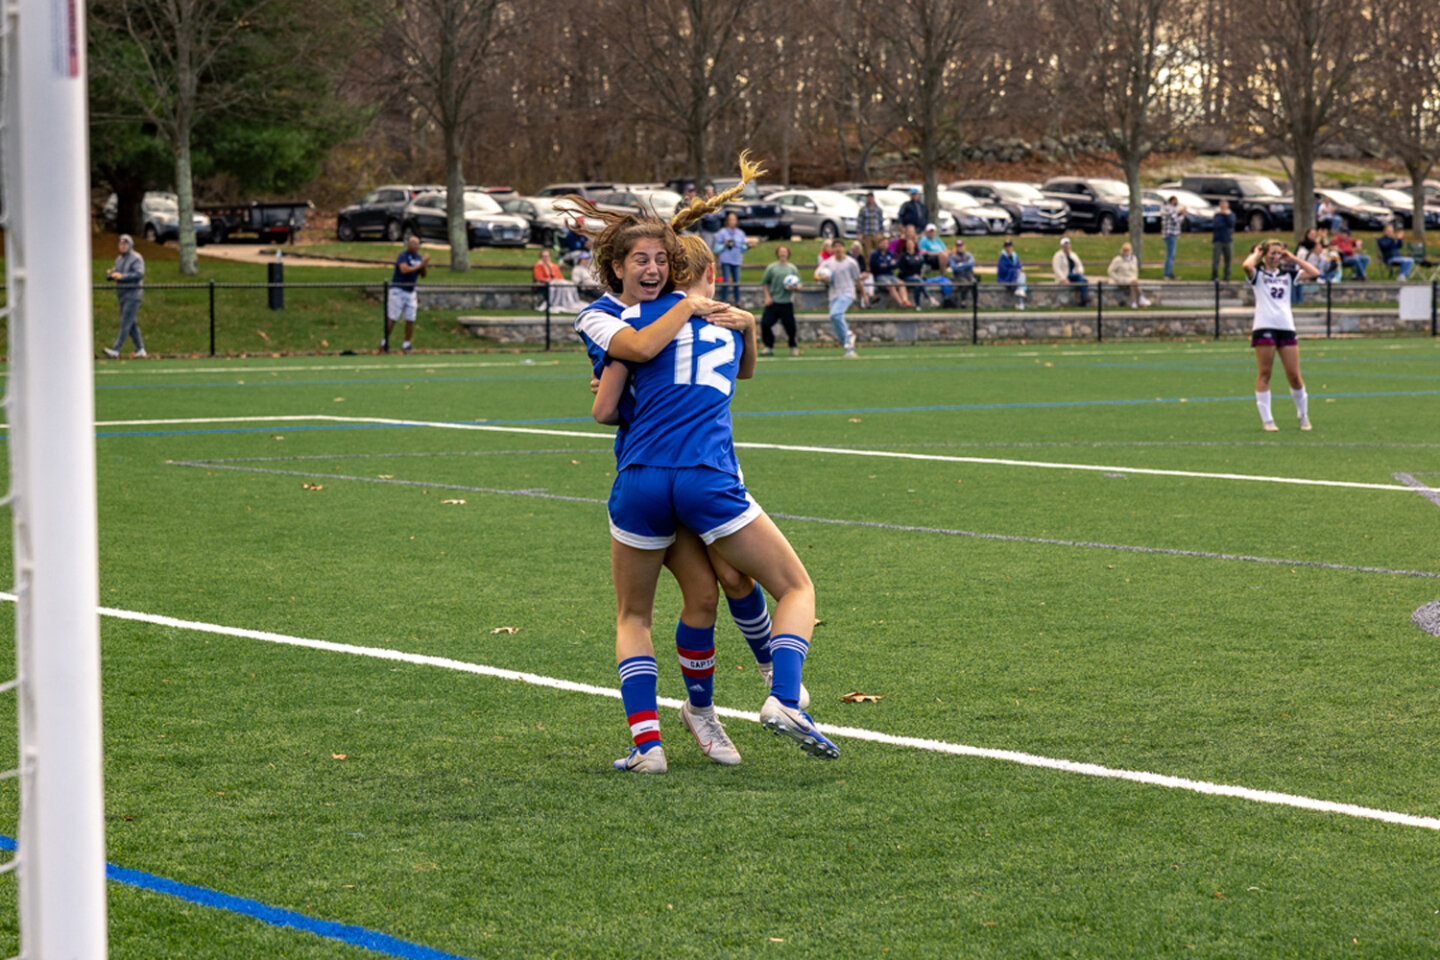 Girls soccer players hug and celebrate on the field during a game